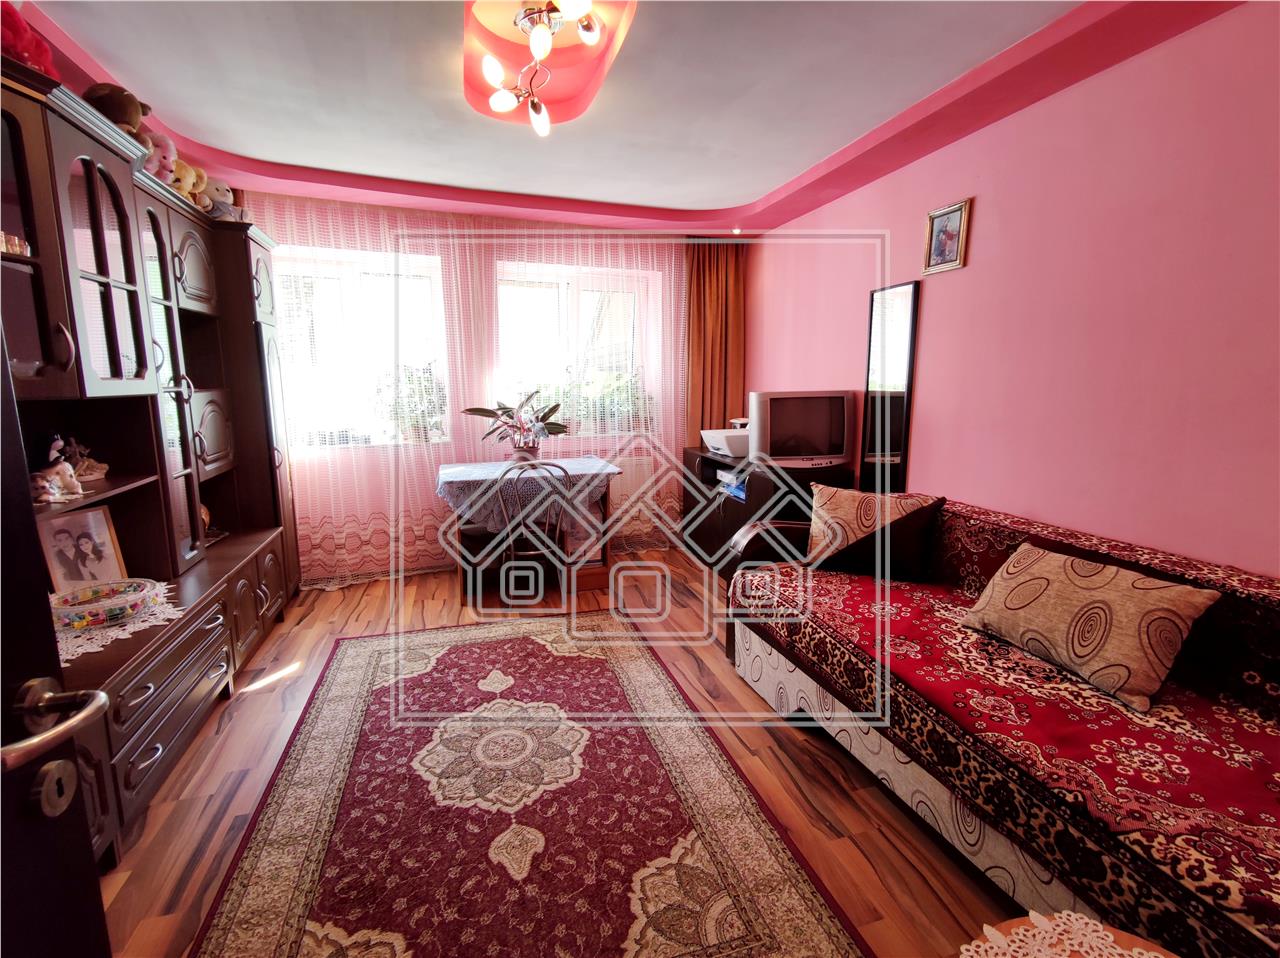 2 room apartment for sale in Sibiu - at home - central area